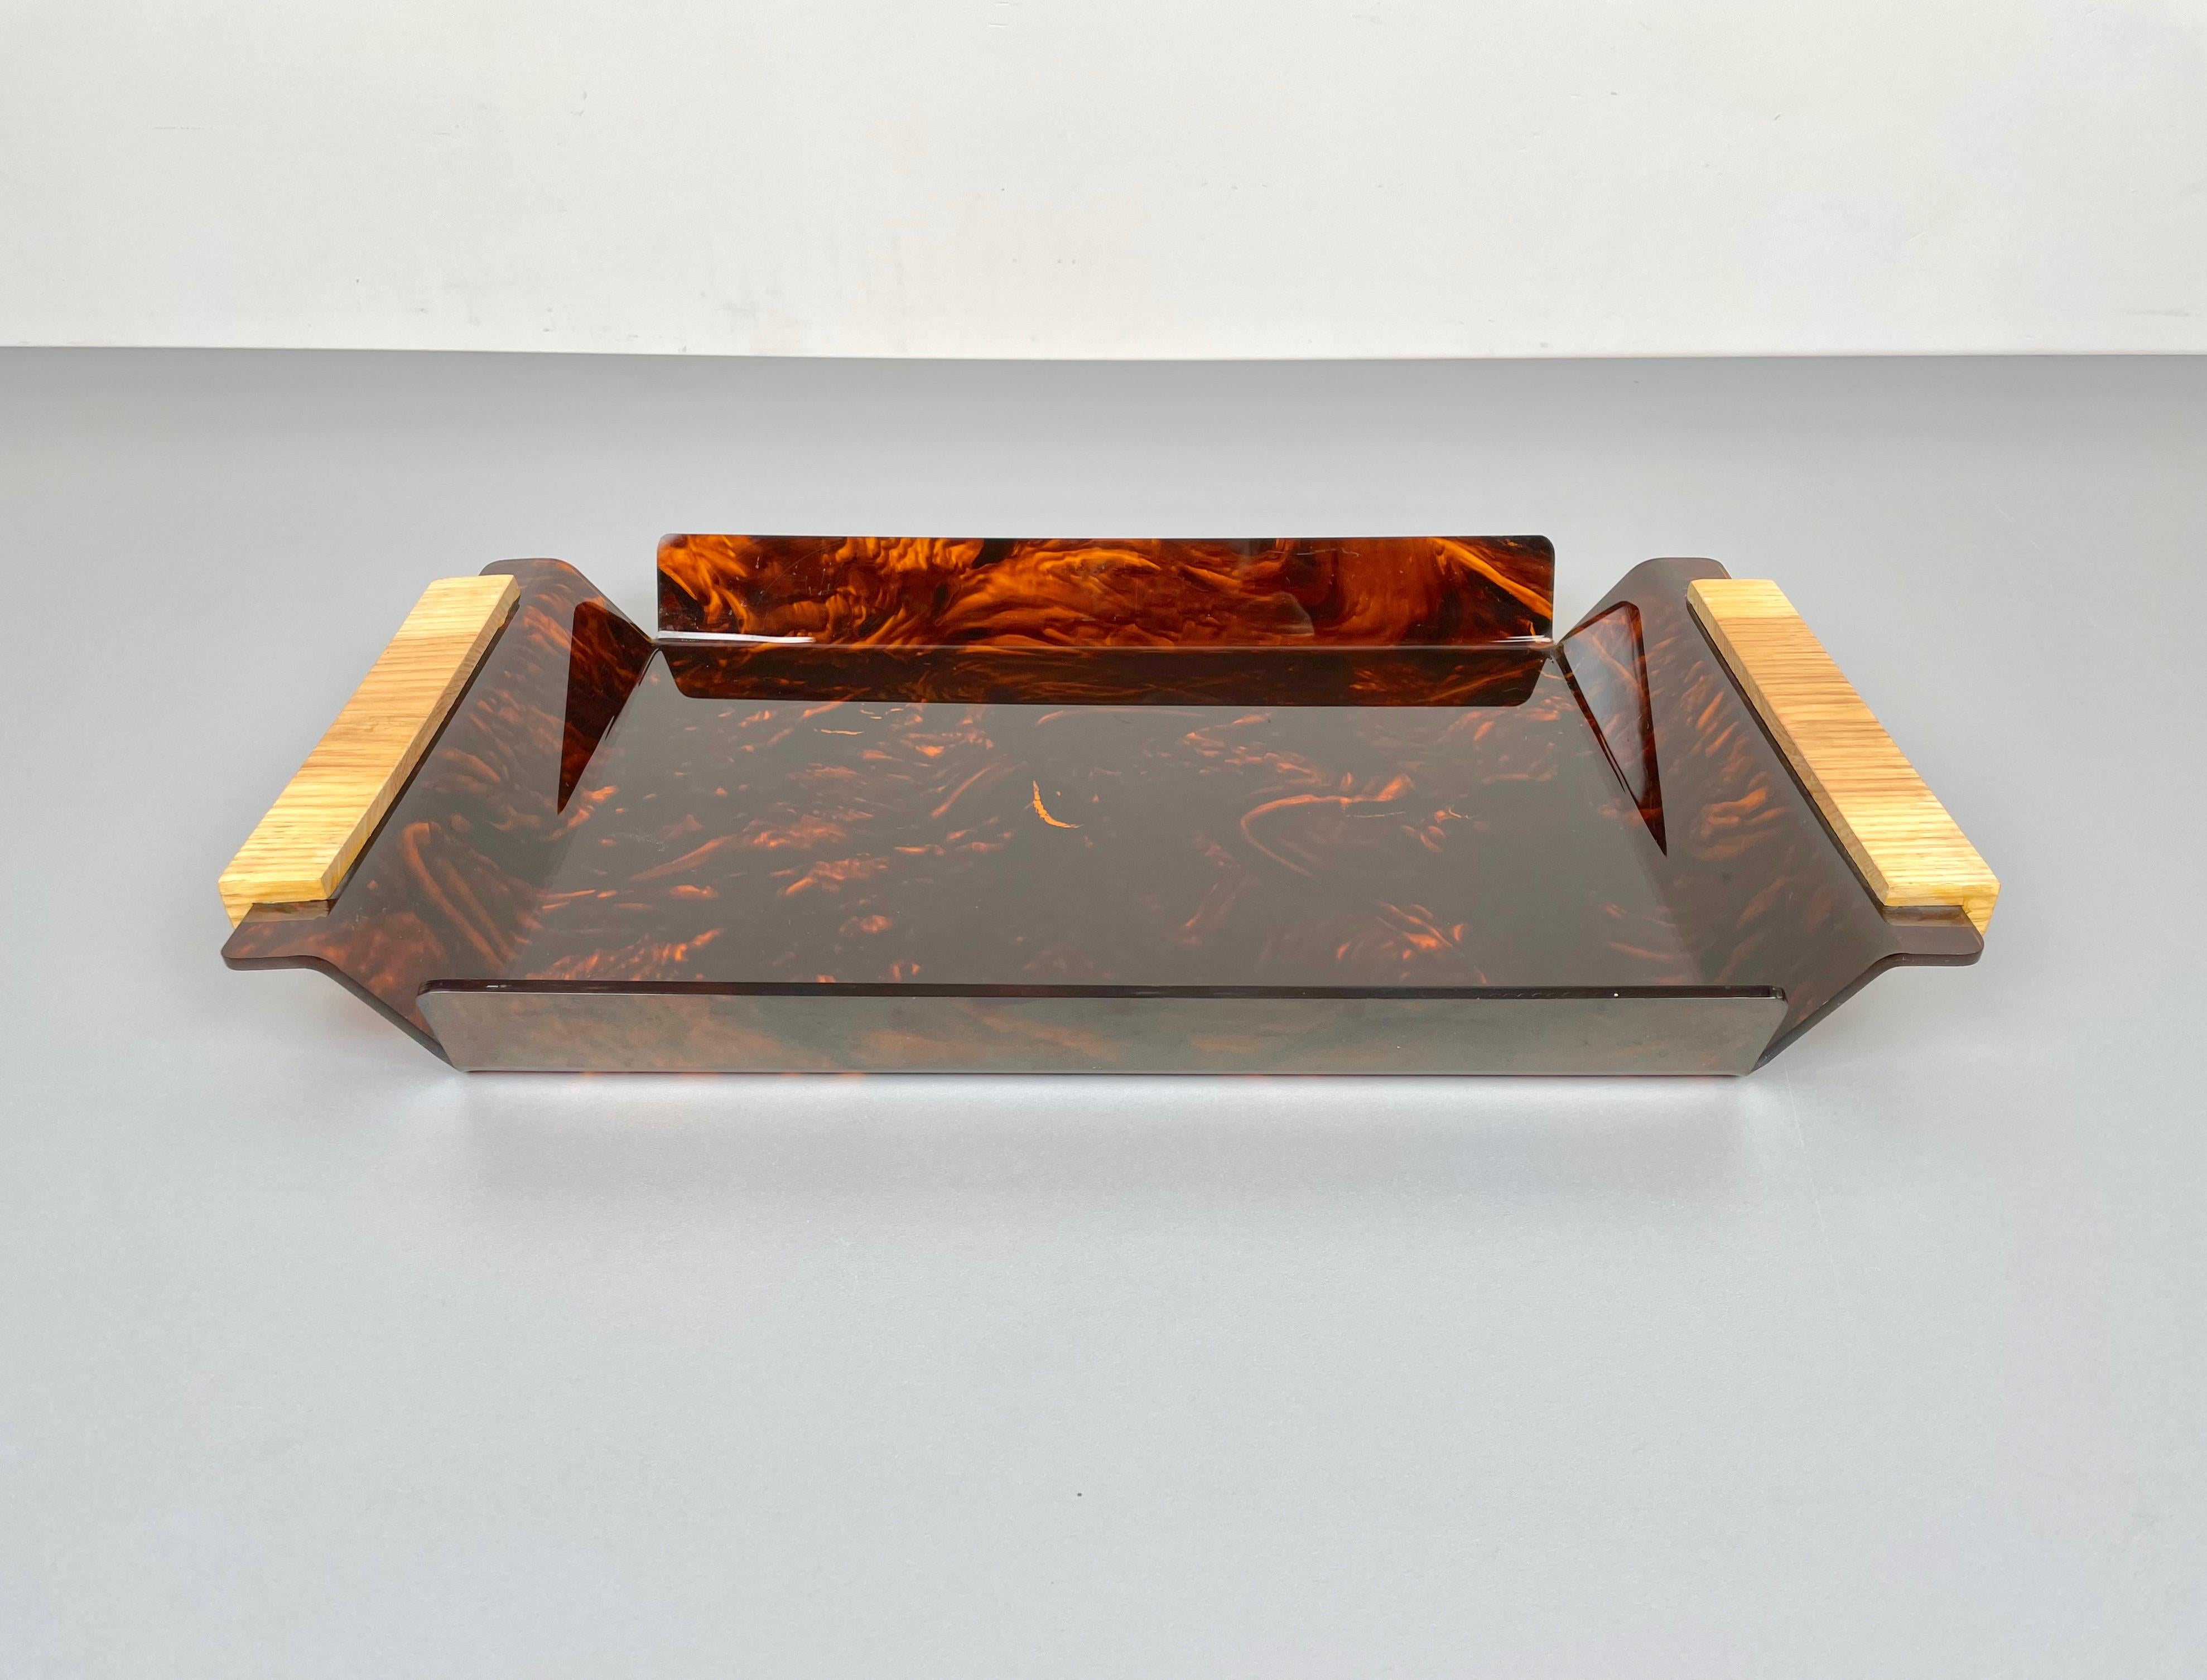 Vintage rectangular serving tray or centerpiece in tortoiseshell-effet lucite and raised handles in wood. Made in Italy in the 1970s.